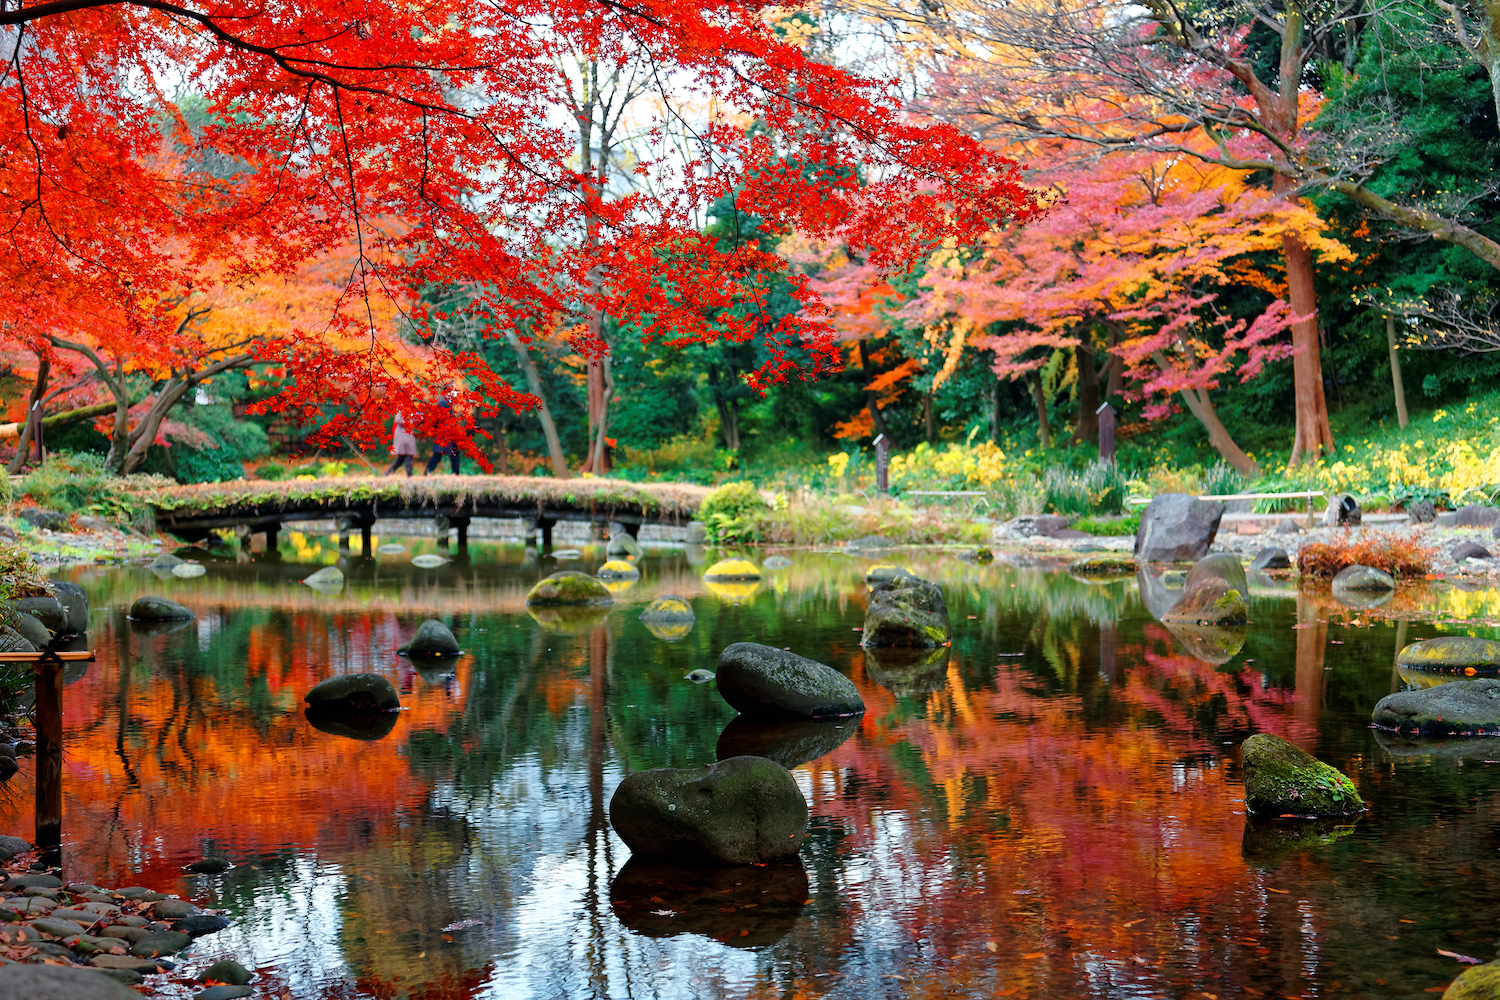 Autumn scenery of fiery maple trees by a wooden bridge reflected in the peaceful water of a pond in Koishikawa Korakuen, a traditional Japanese garden famous for brilliant fall foliage in Tokyo, Japan